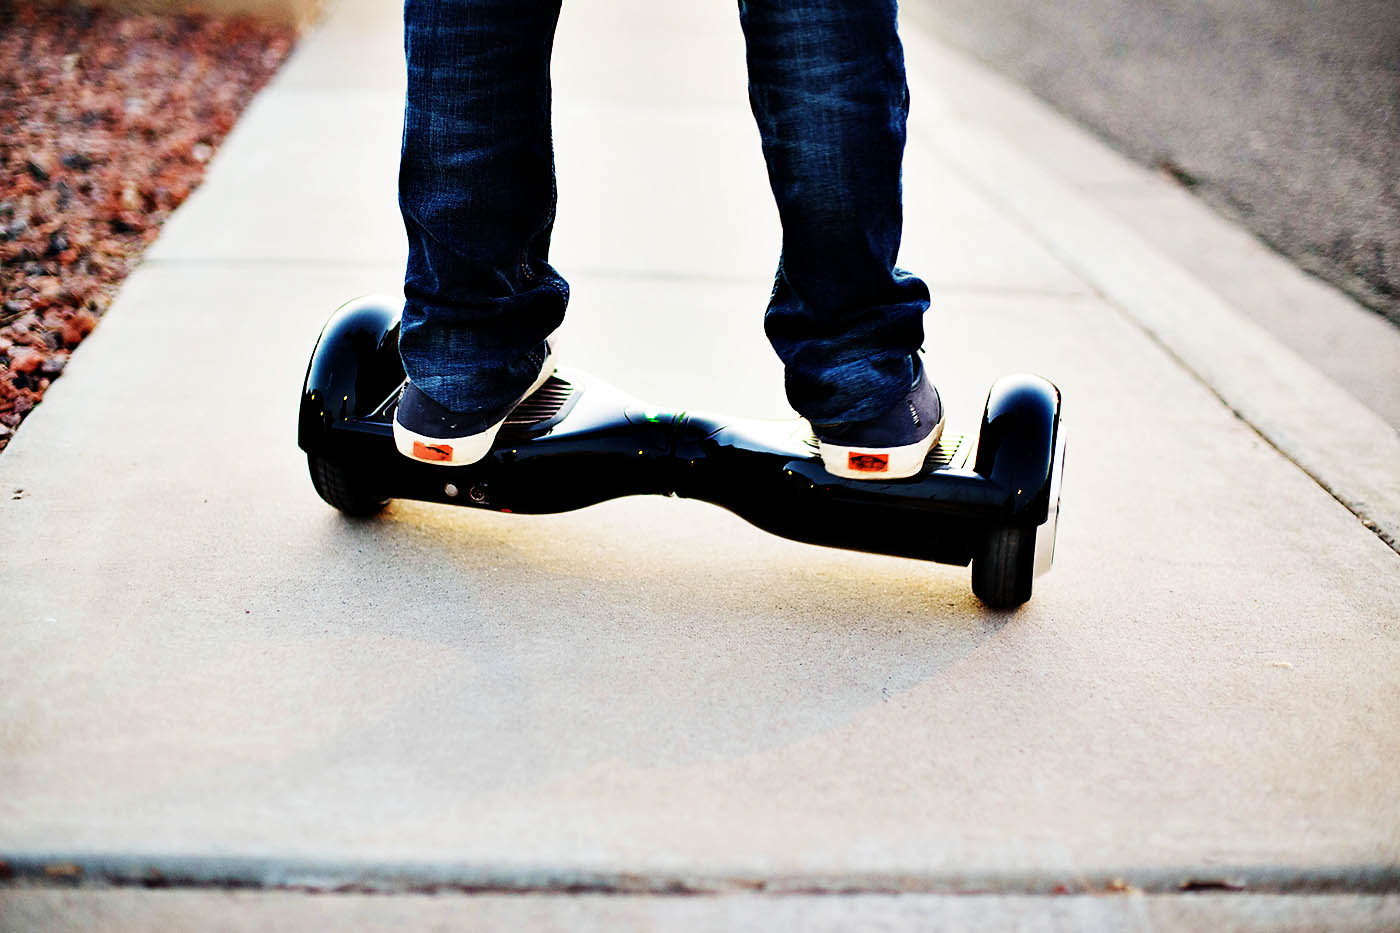 GOTRAX Hoverfly hoverboard - fun Christmas idea for older kids!